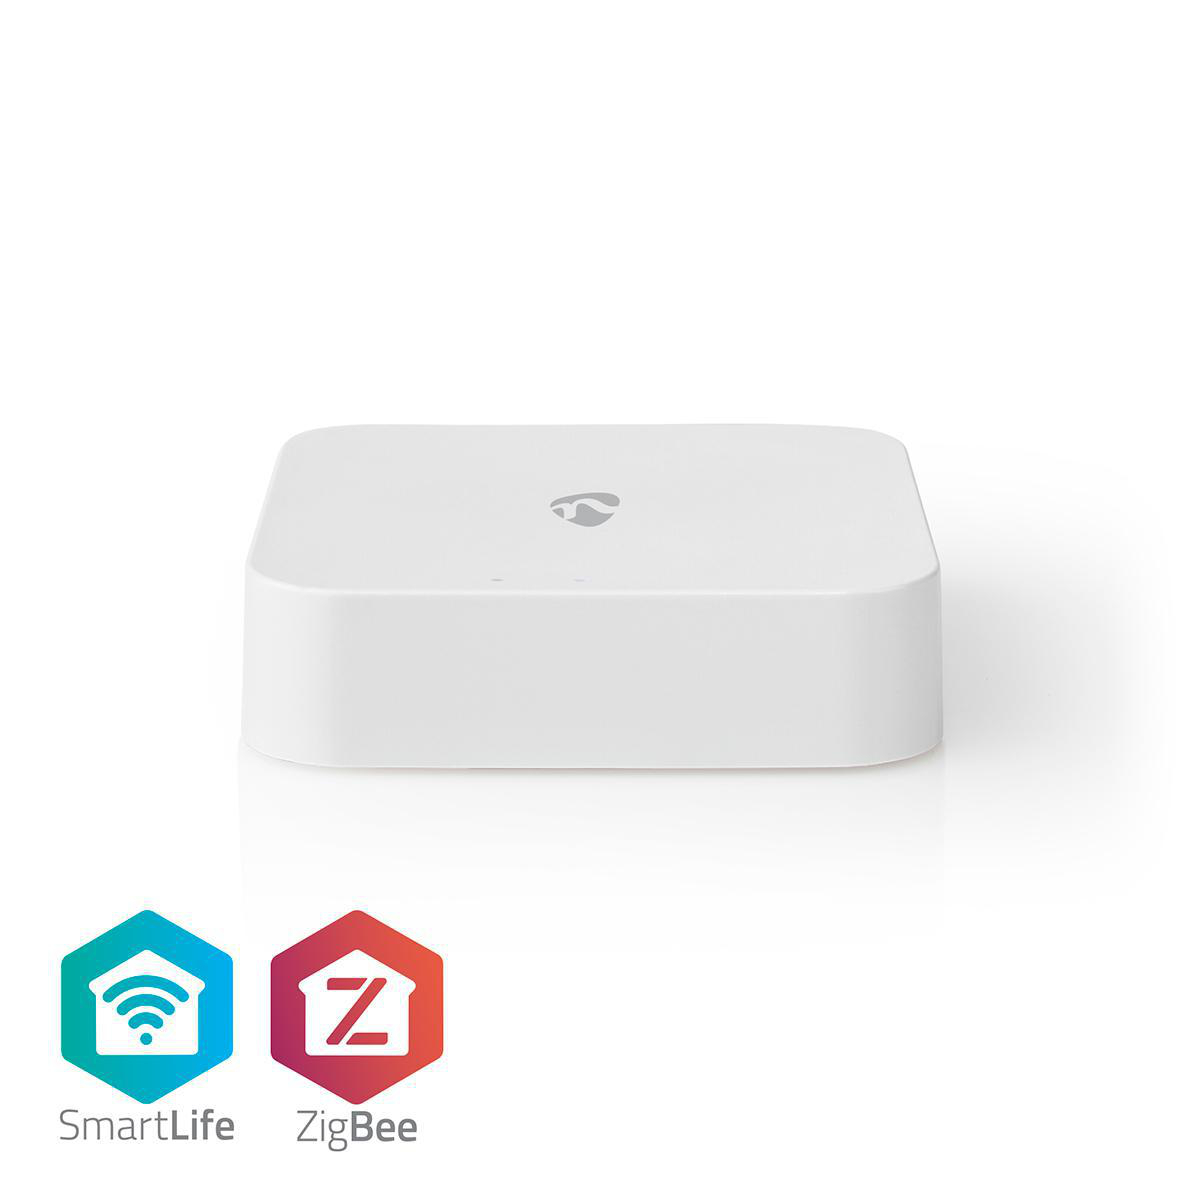 SmartLife Gateway, Zigbee 3.0, 40 Devices, USB Powered, Android™ / IOS